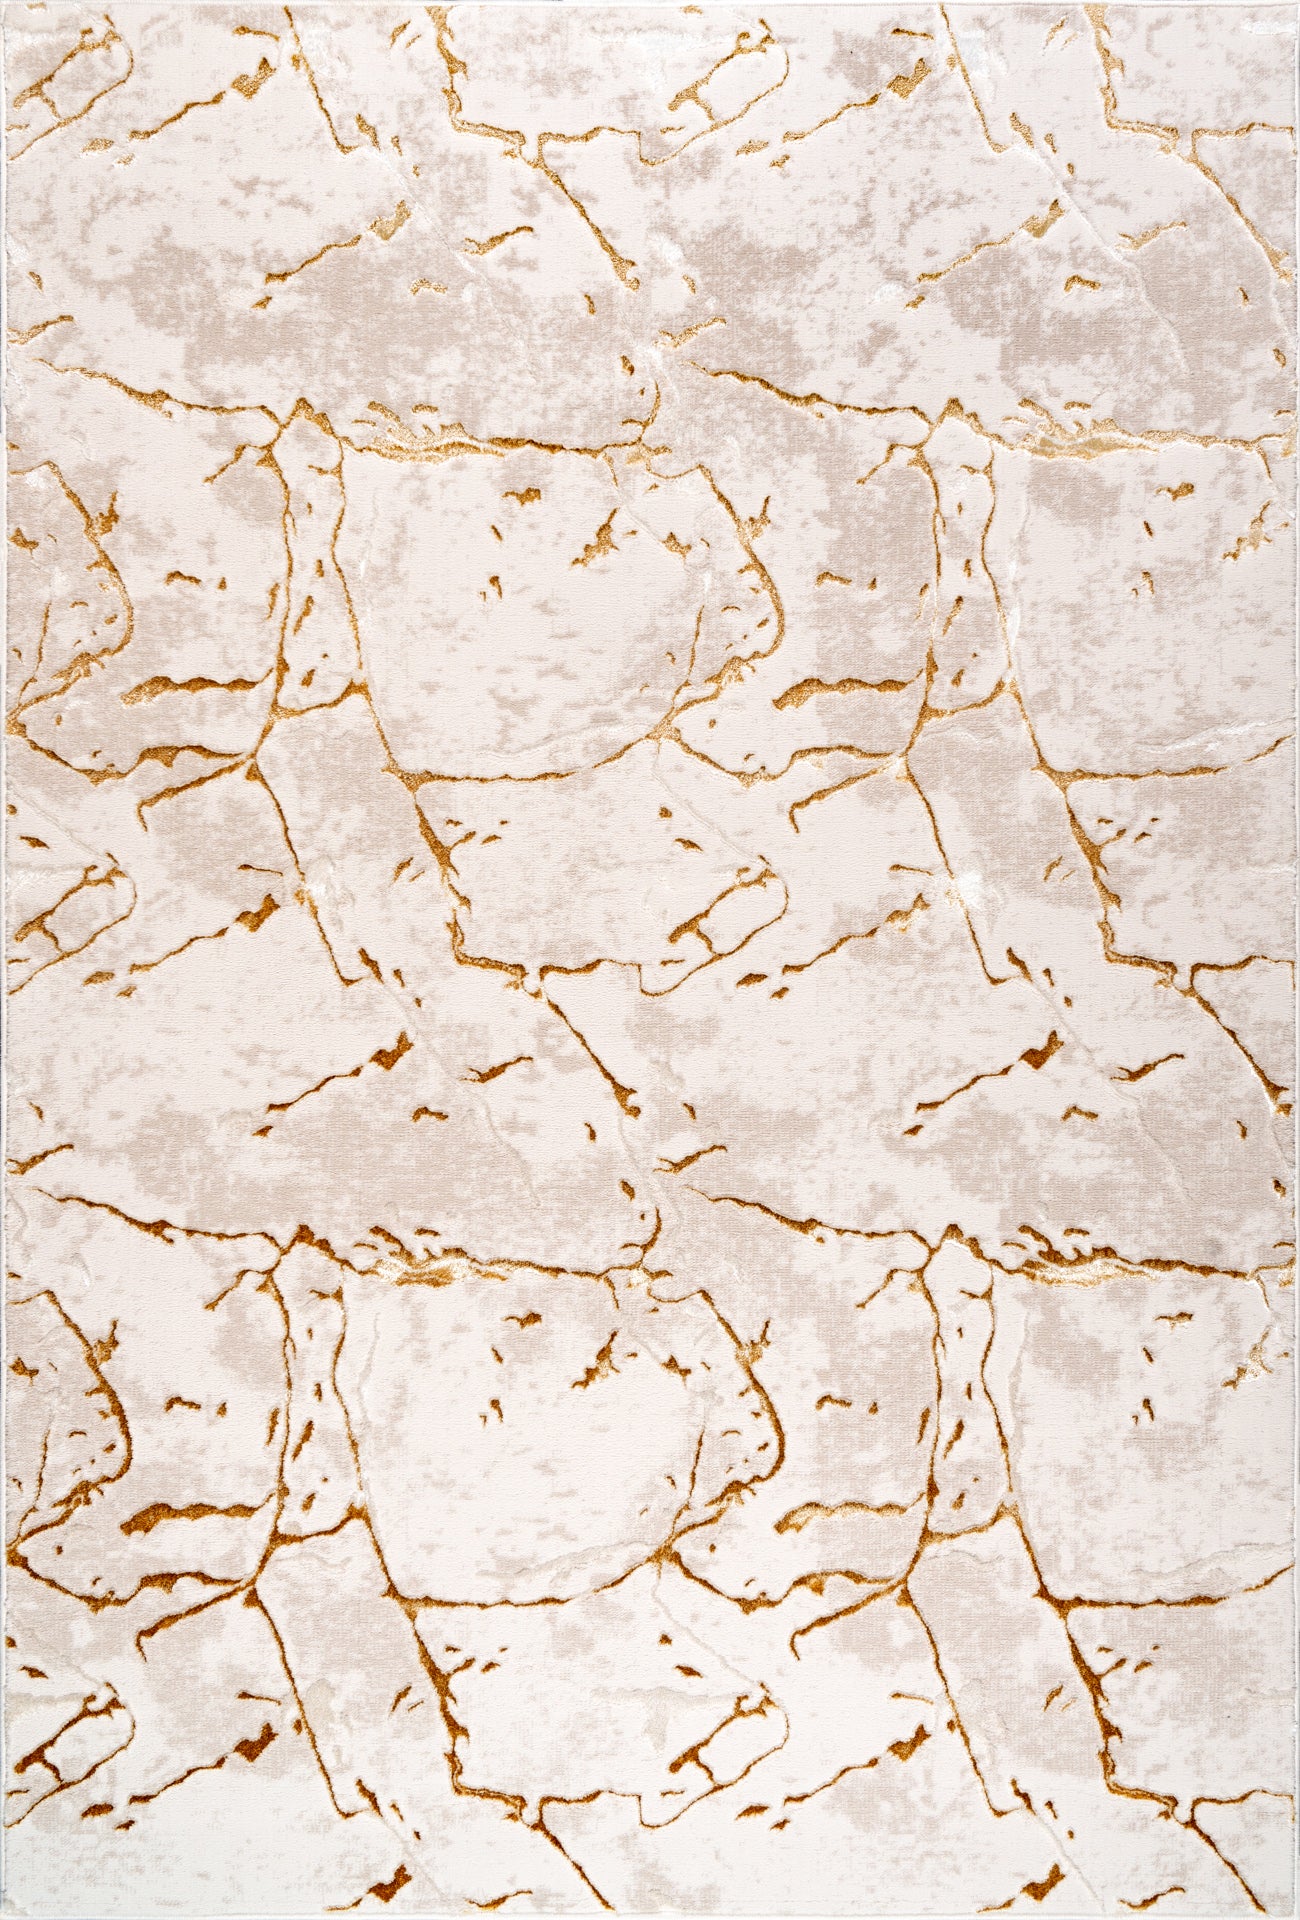 LaDole Rugs Abstract Modern Minimalist Contemporary Rug - Luxury Premium Carpet for Living Room, Bedroom, Office, Entrance, and Hallway - Gold and Beige